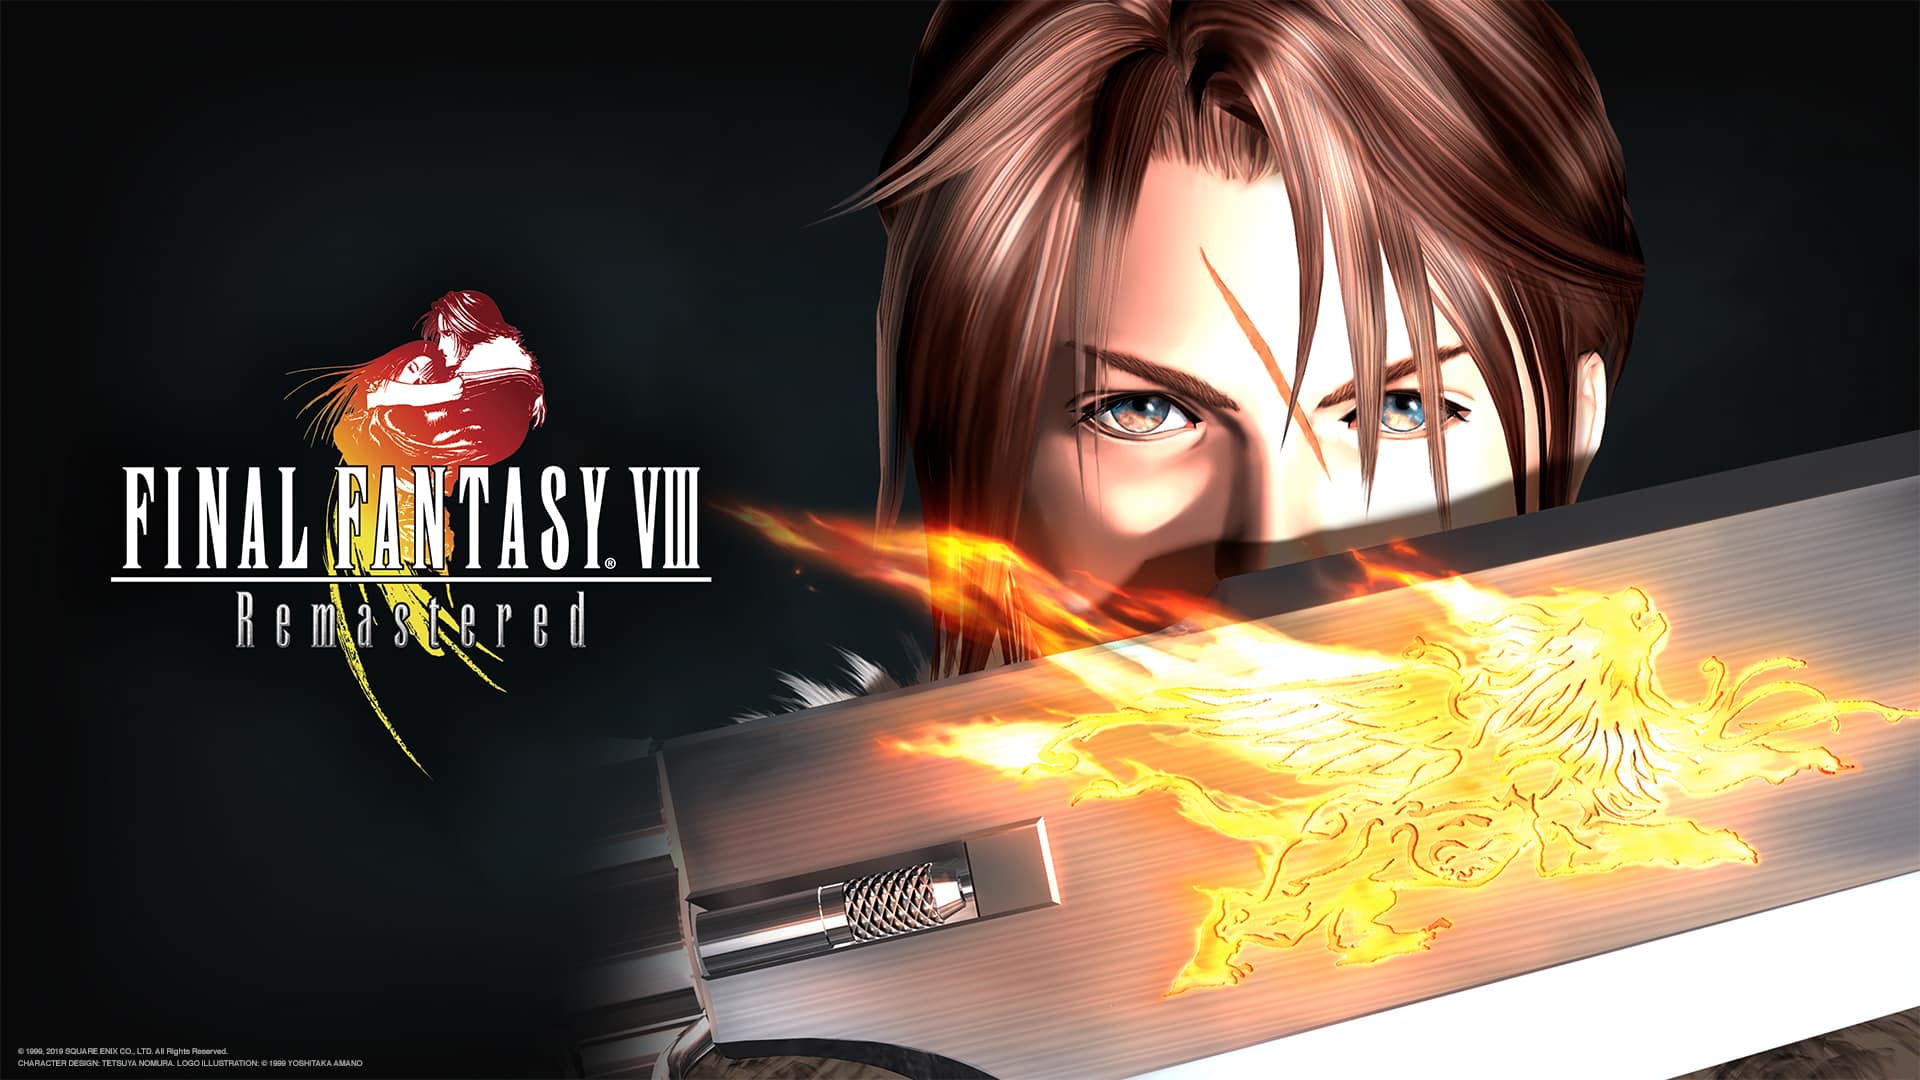 Final Fantasy, Final Fantasy VIII, Final Fantasy VIII Remastered, Final Fantasy 8 iOS, Final Fantasy VIII Android